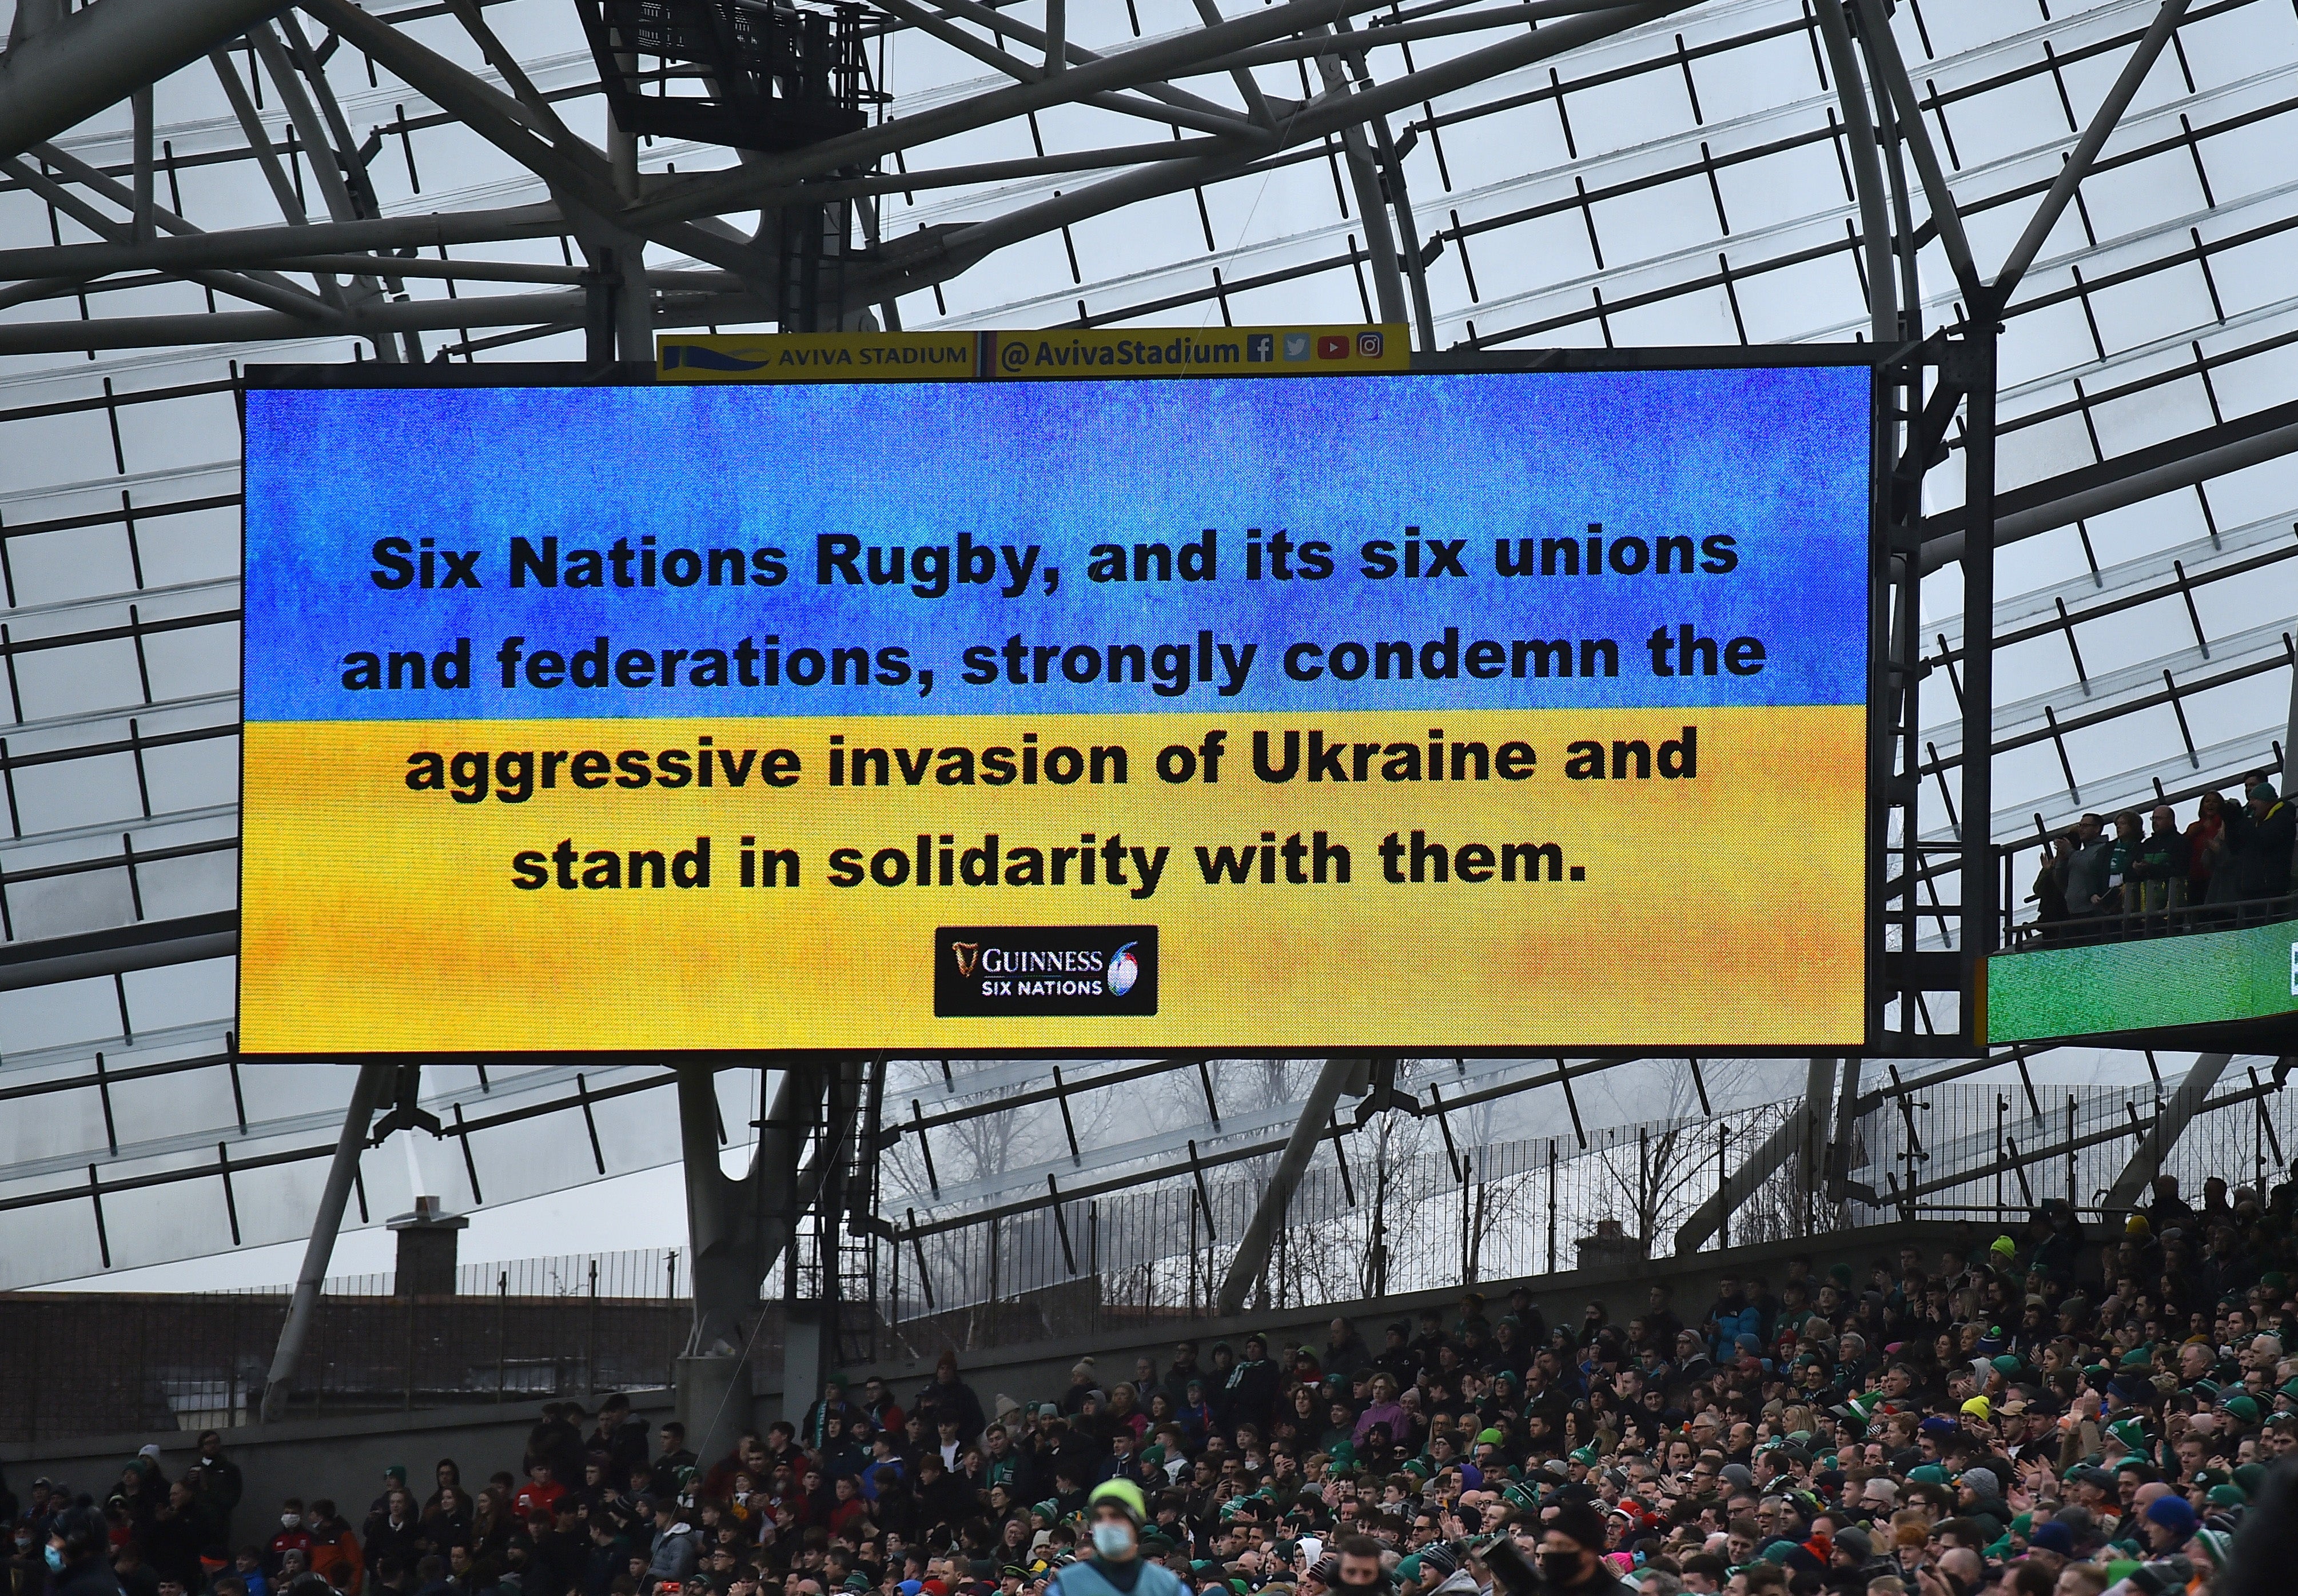 A message in support of Ukraine is shown inside the stadium before the match